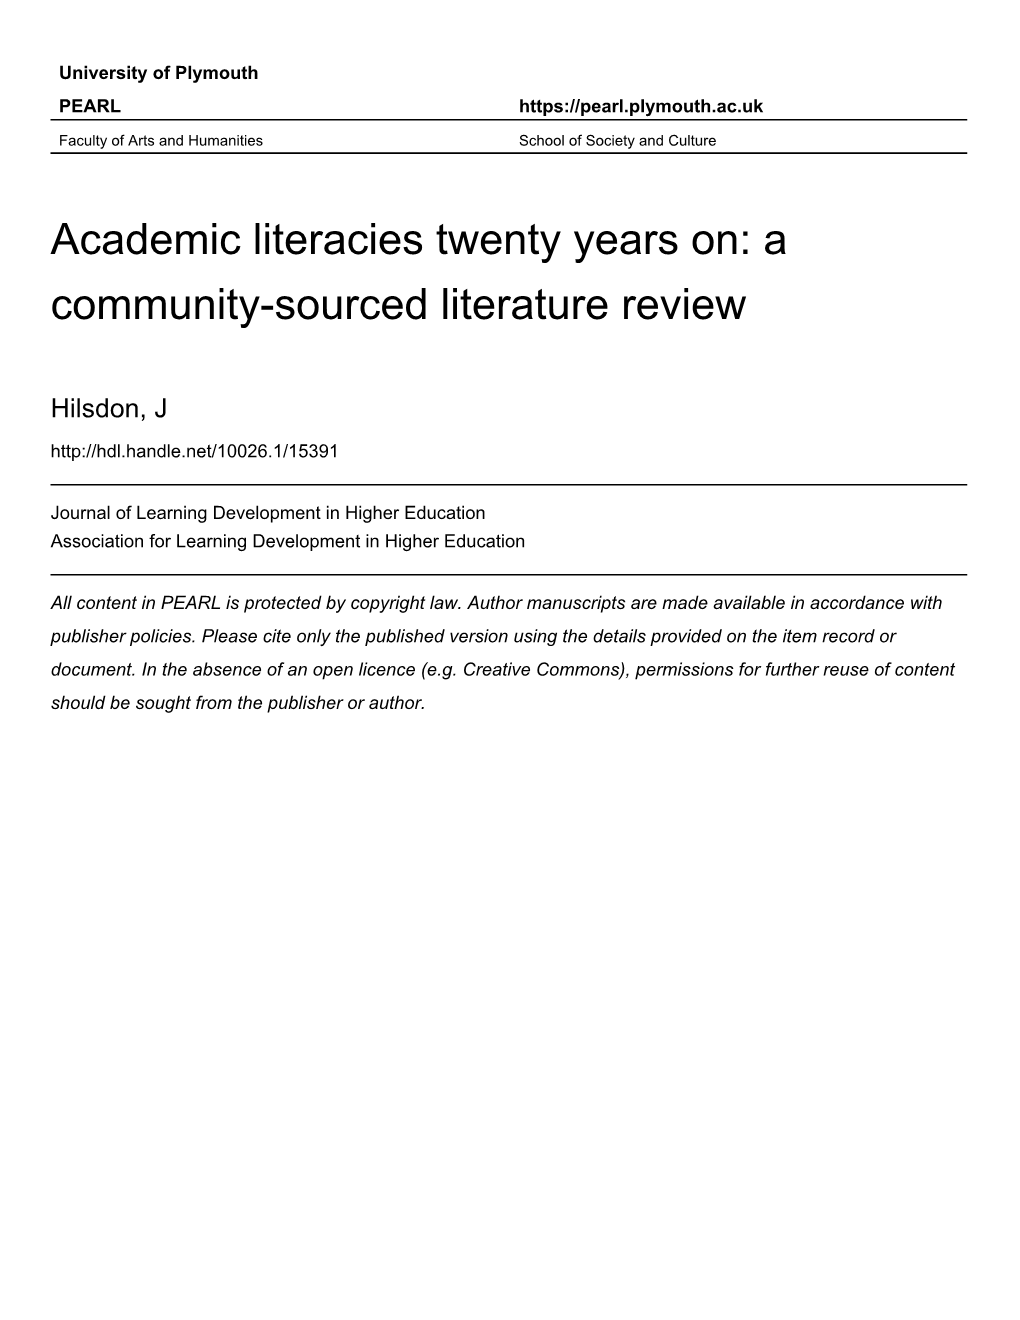 Academic Literacies Twenty Years On: a Community-Sourced Literature Review